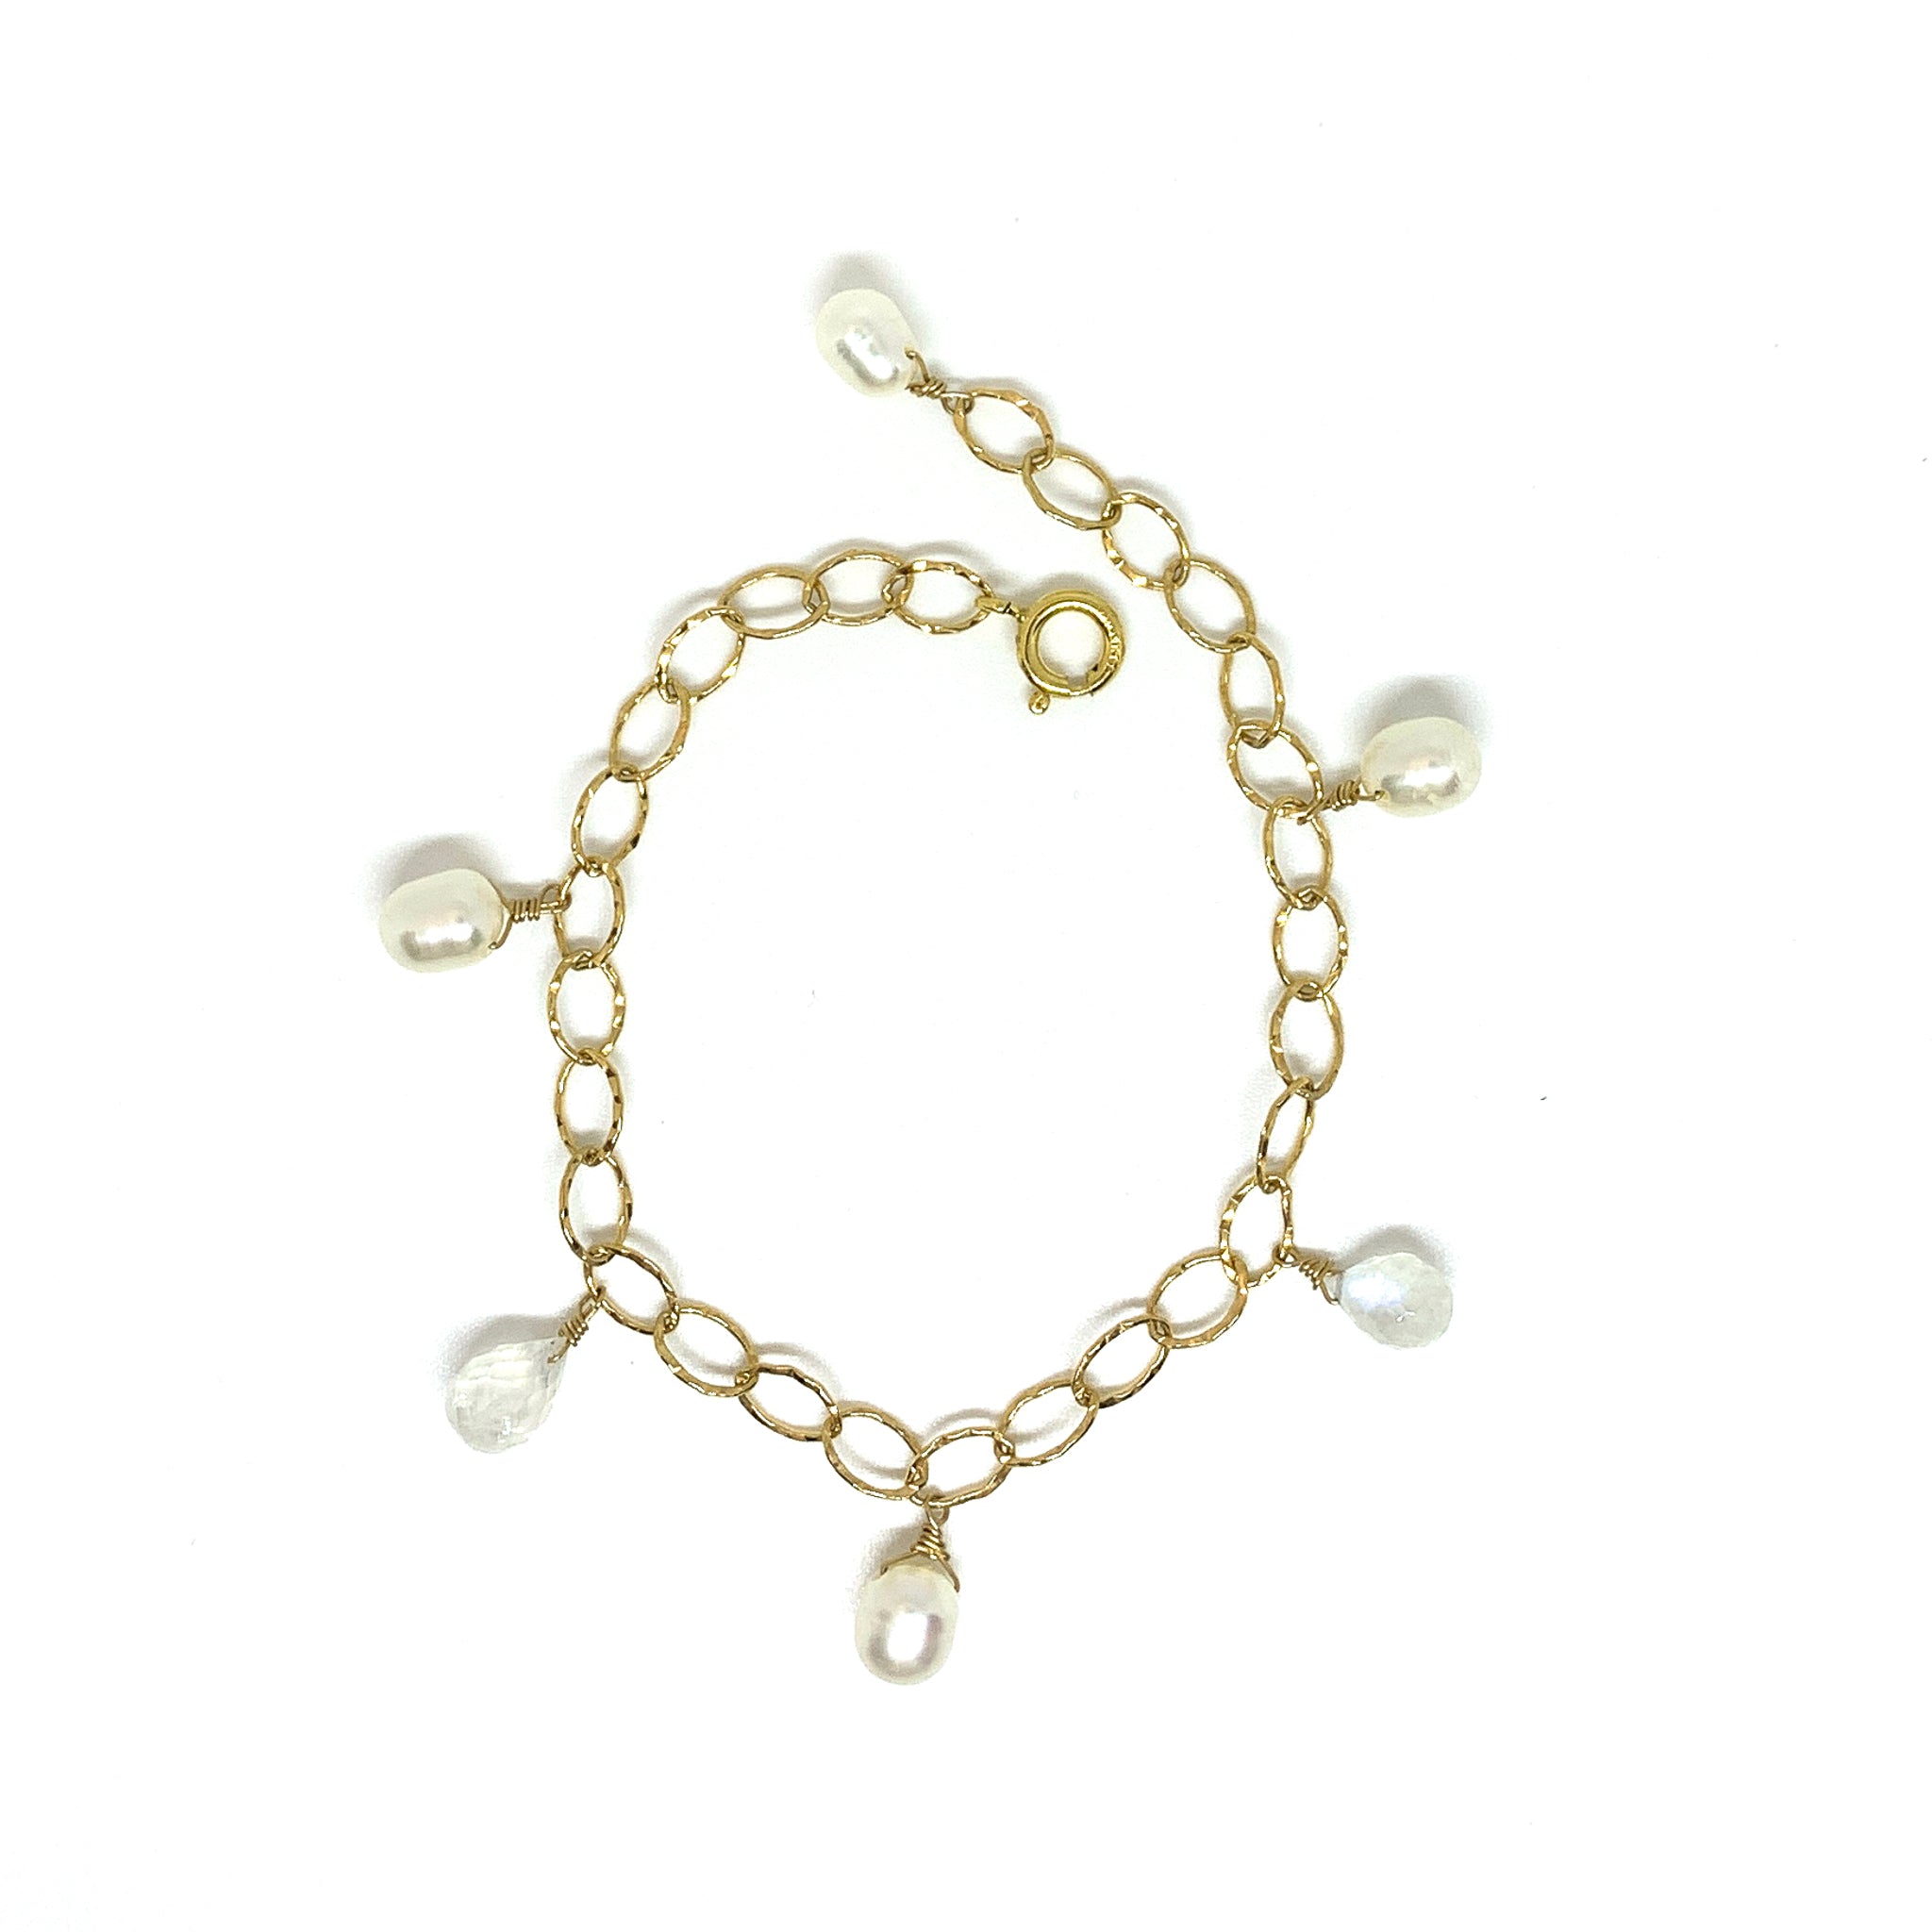 white pearl and moonstone charm bracelet by eve black jewelry handmade in Hawaii